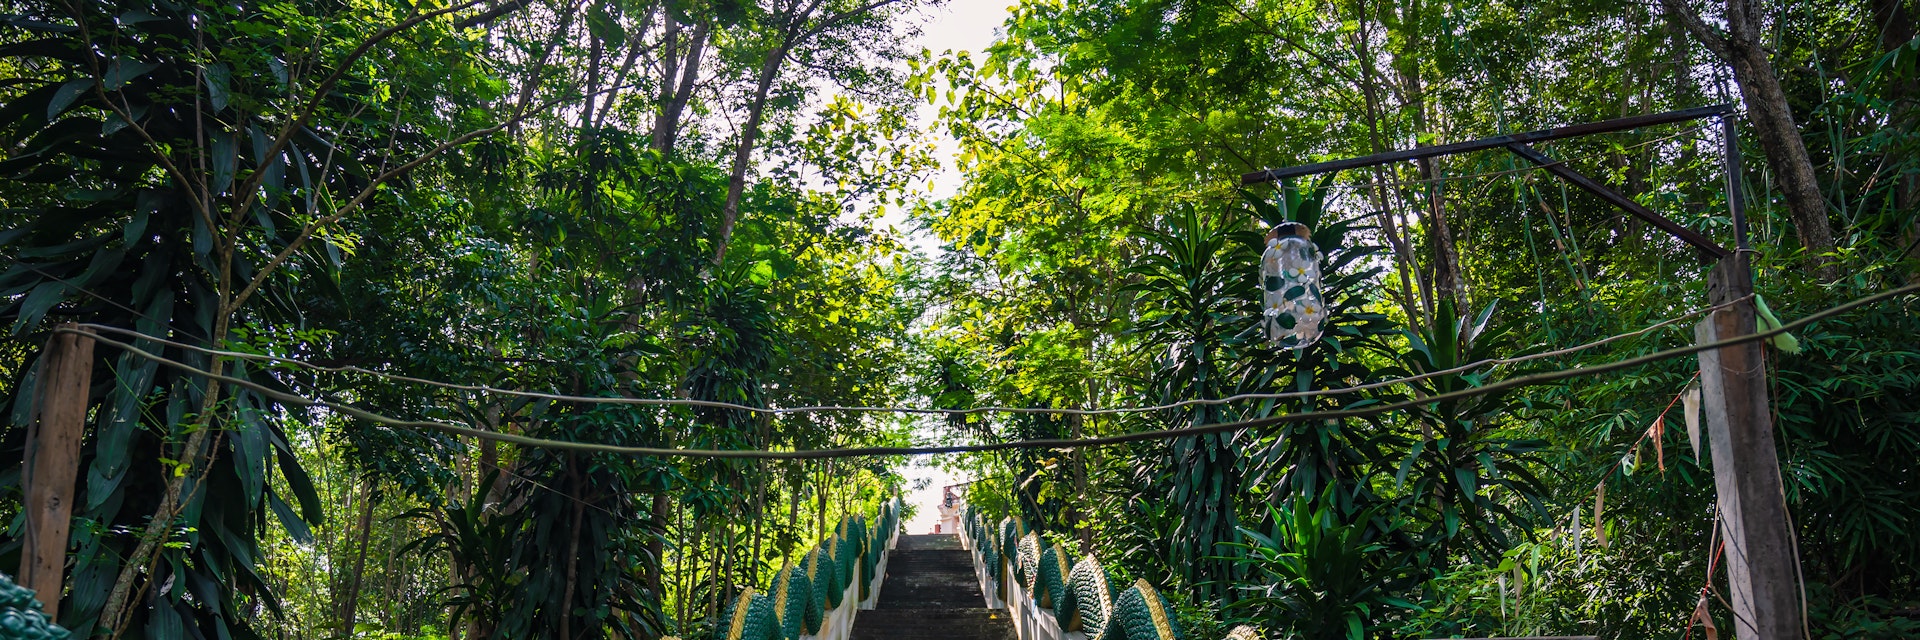 Phu chang noi stairway with naga statue at chiang khan loei thailad.Chiang Khan is an old town and a very popular destination for Thai tourists